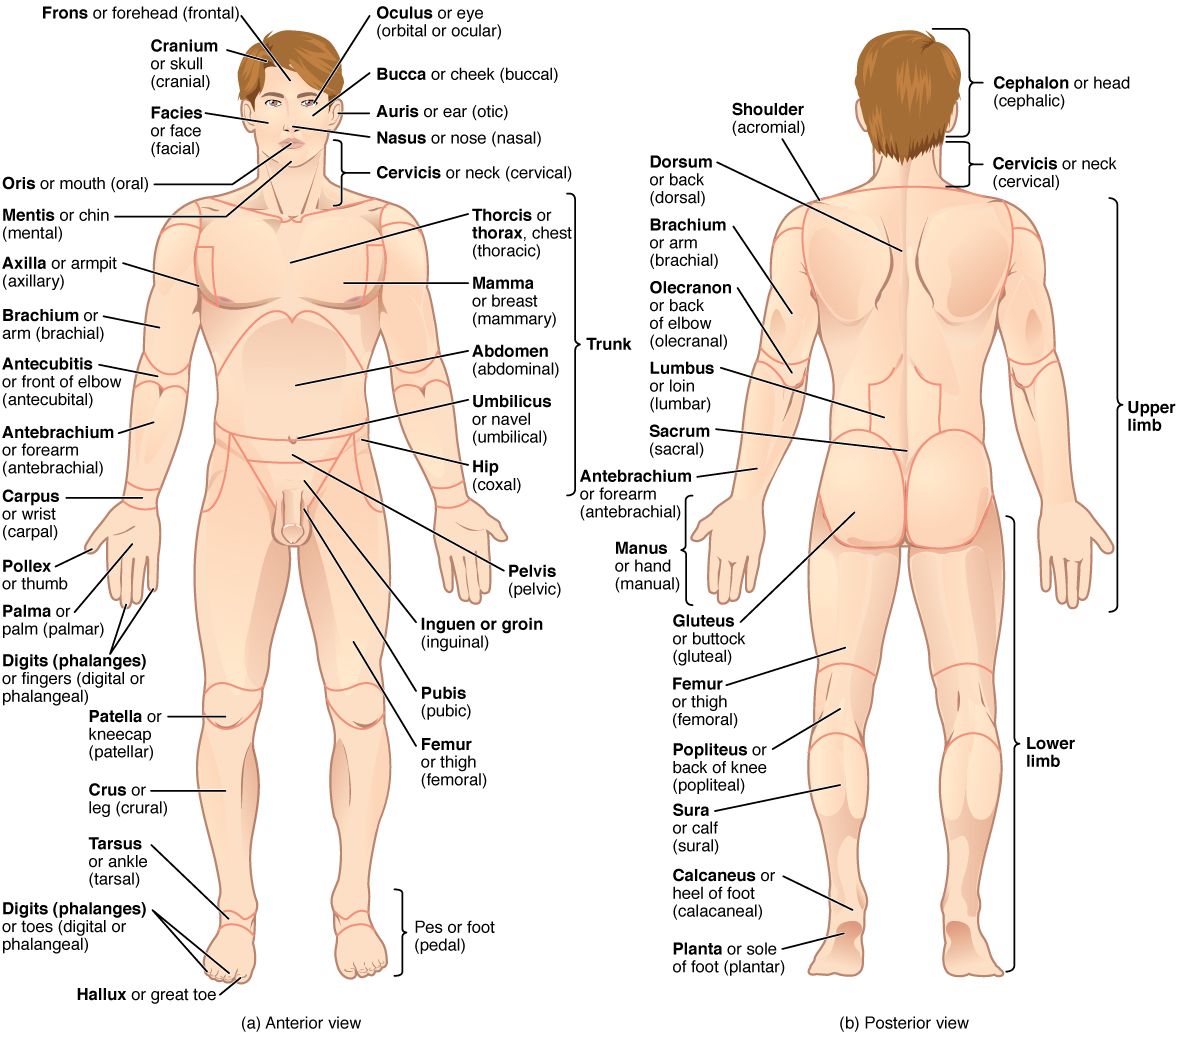 Regions of the human body. Image description available.